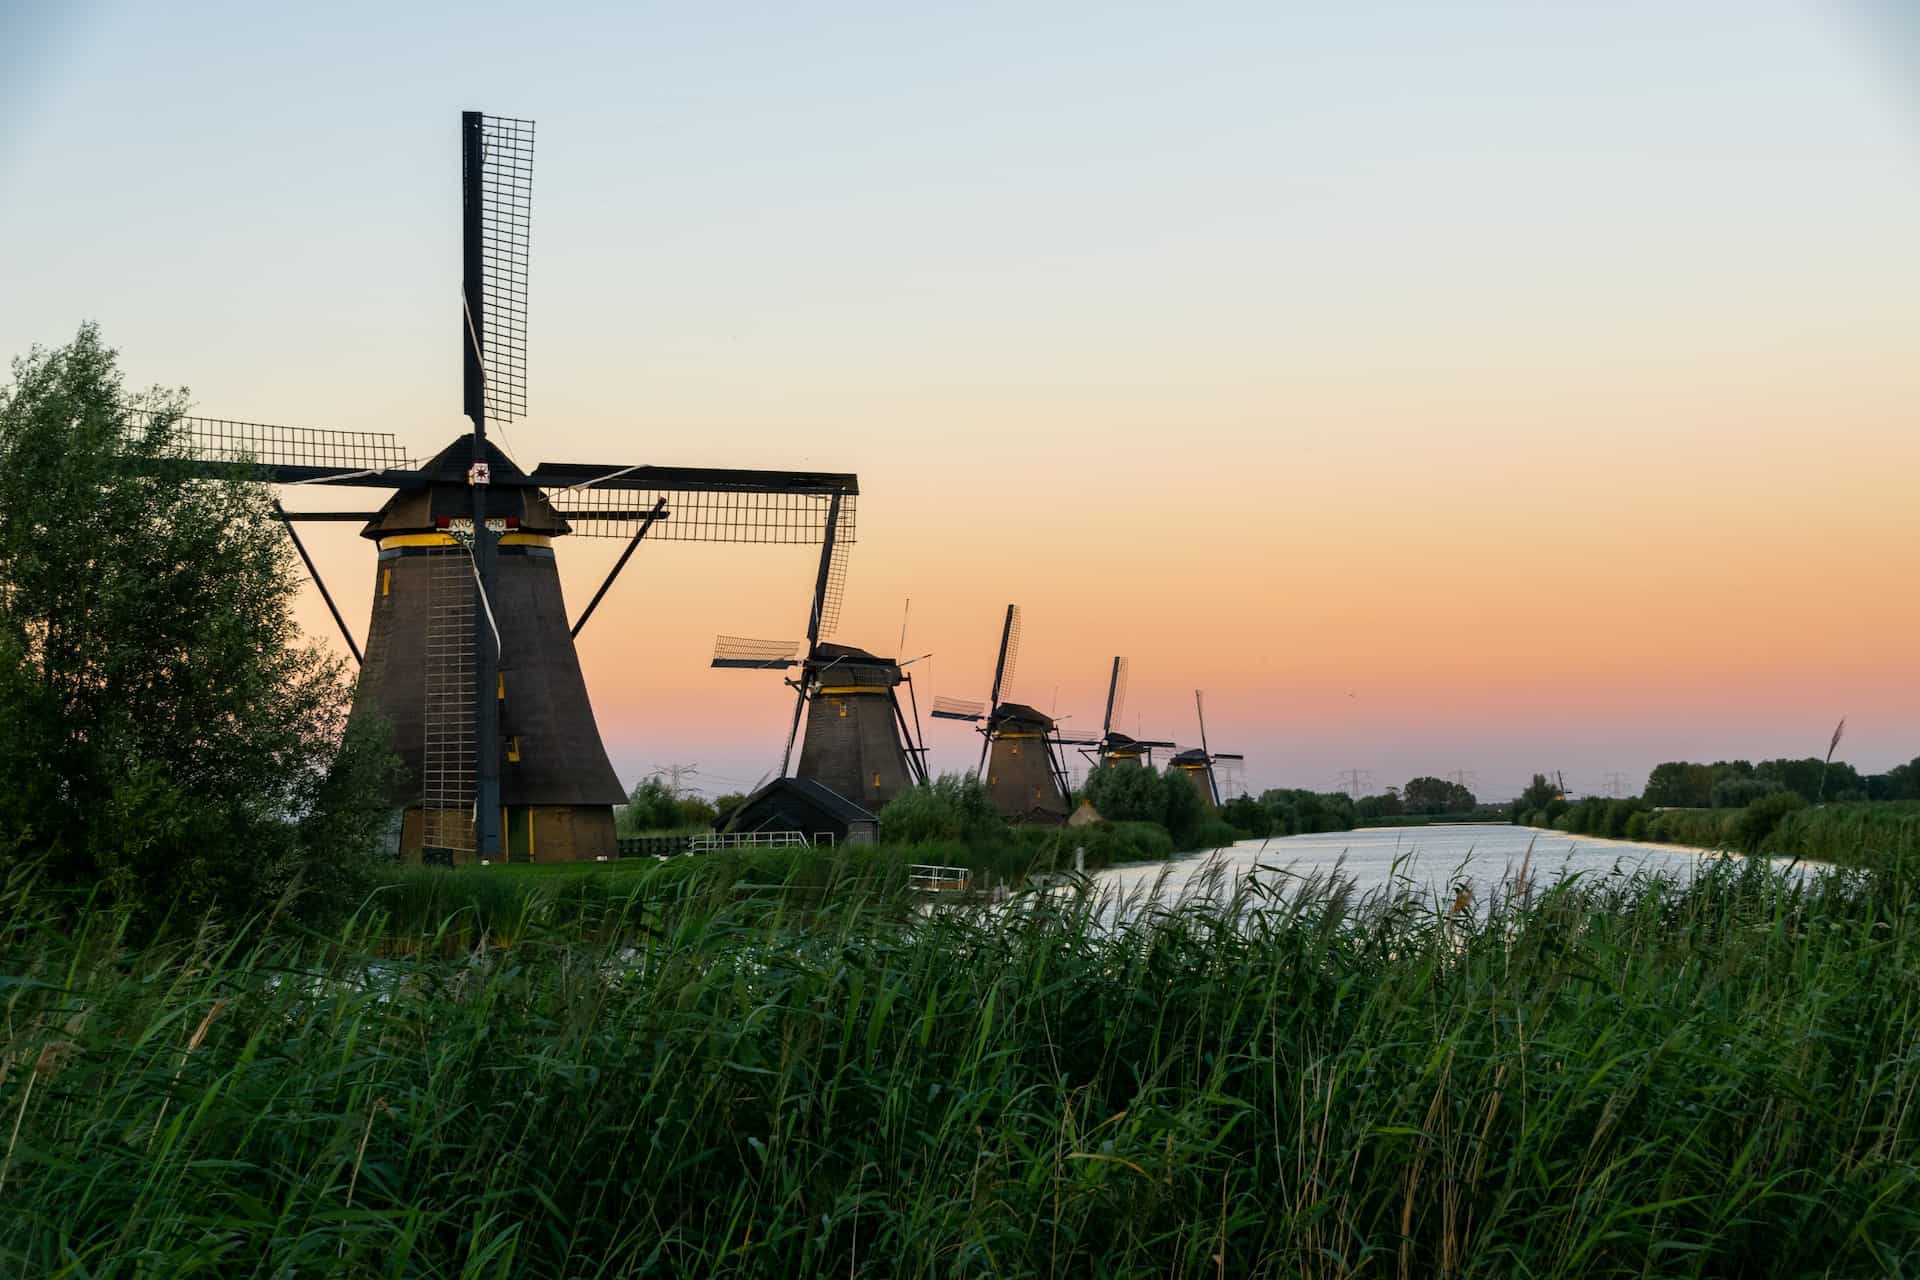 A series of windmills in a green field near water during sunset.